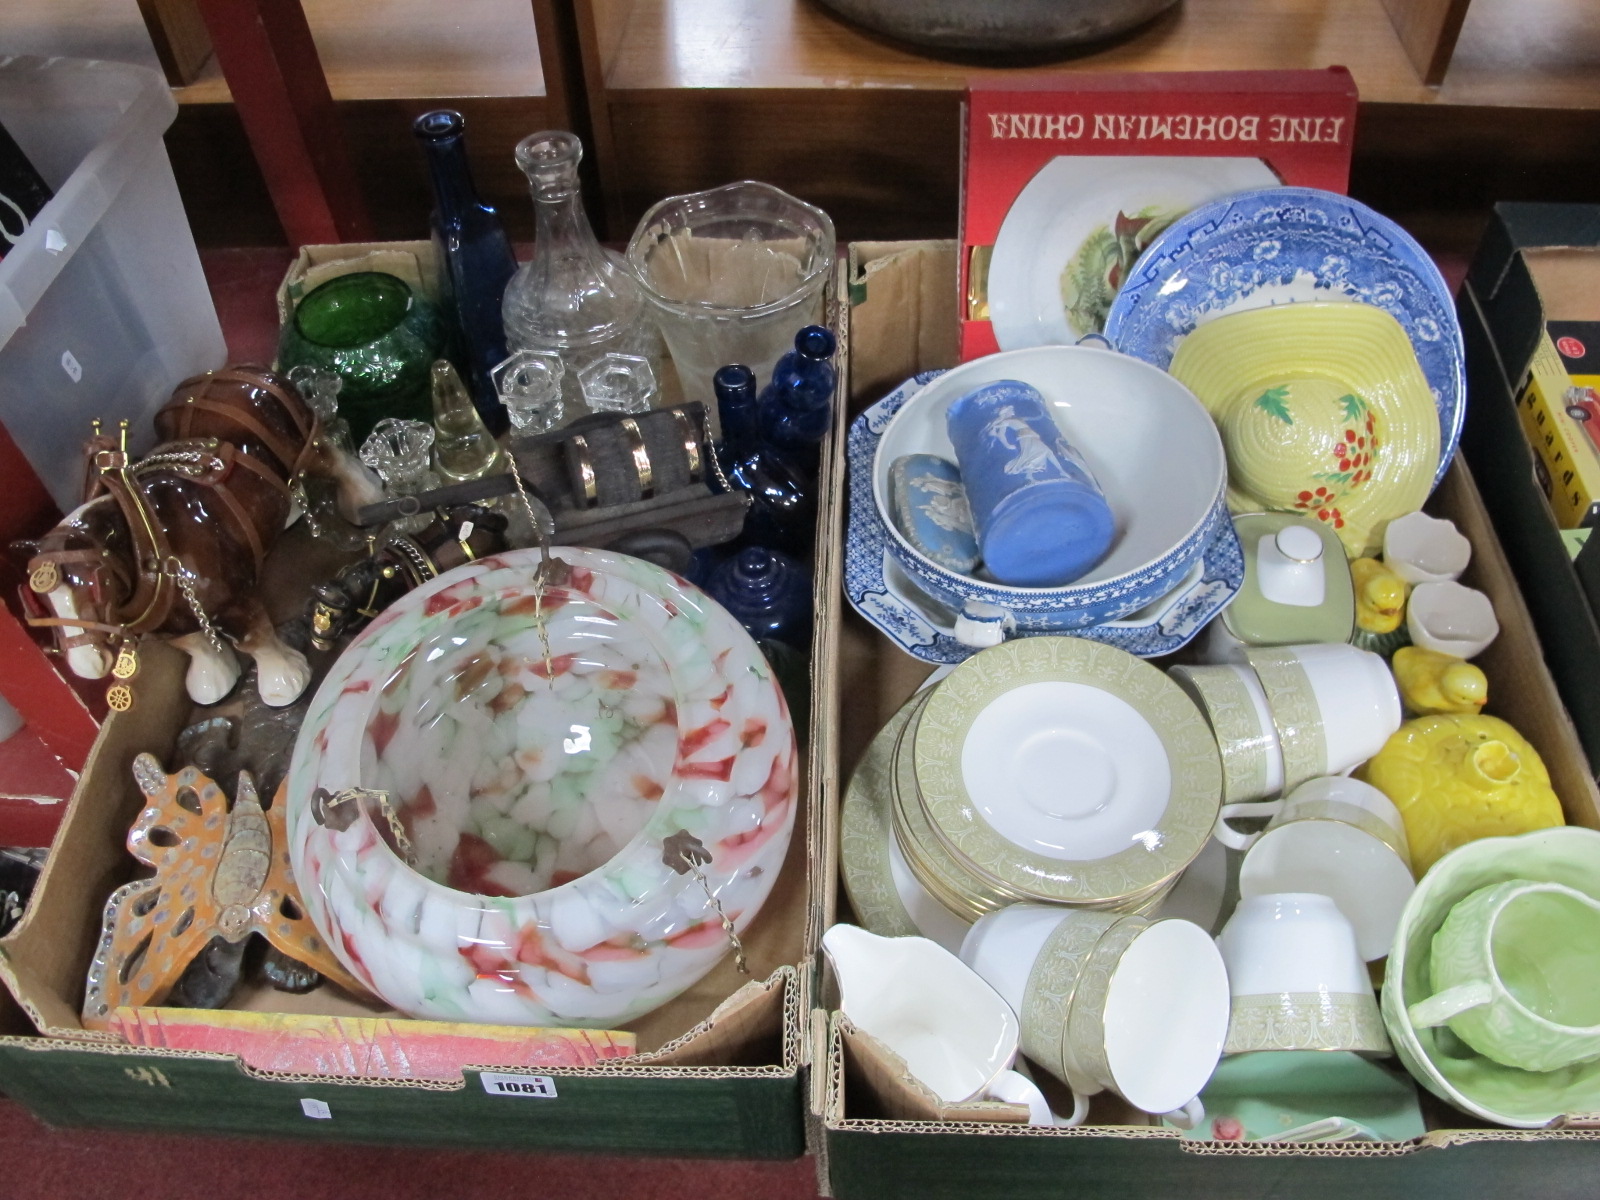 Doulton 'Sonnet' Tea Ware, wall posy, Wedgwood trinket box, glassware, ceiling light:- Two Boxes